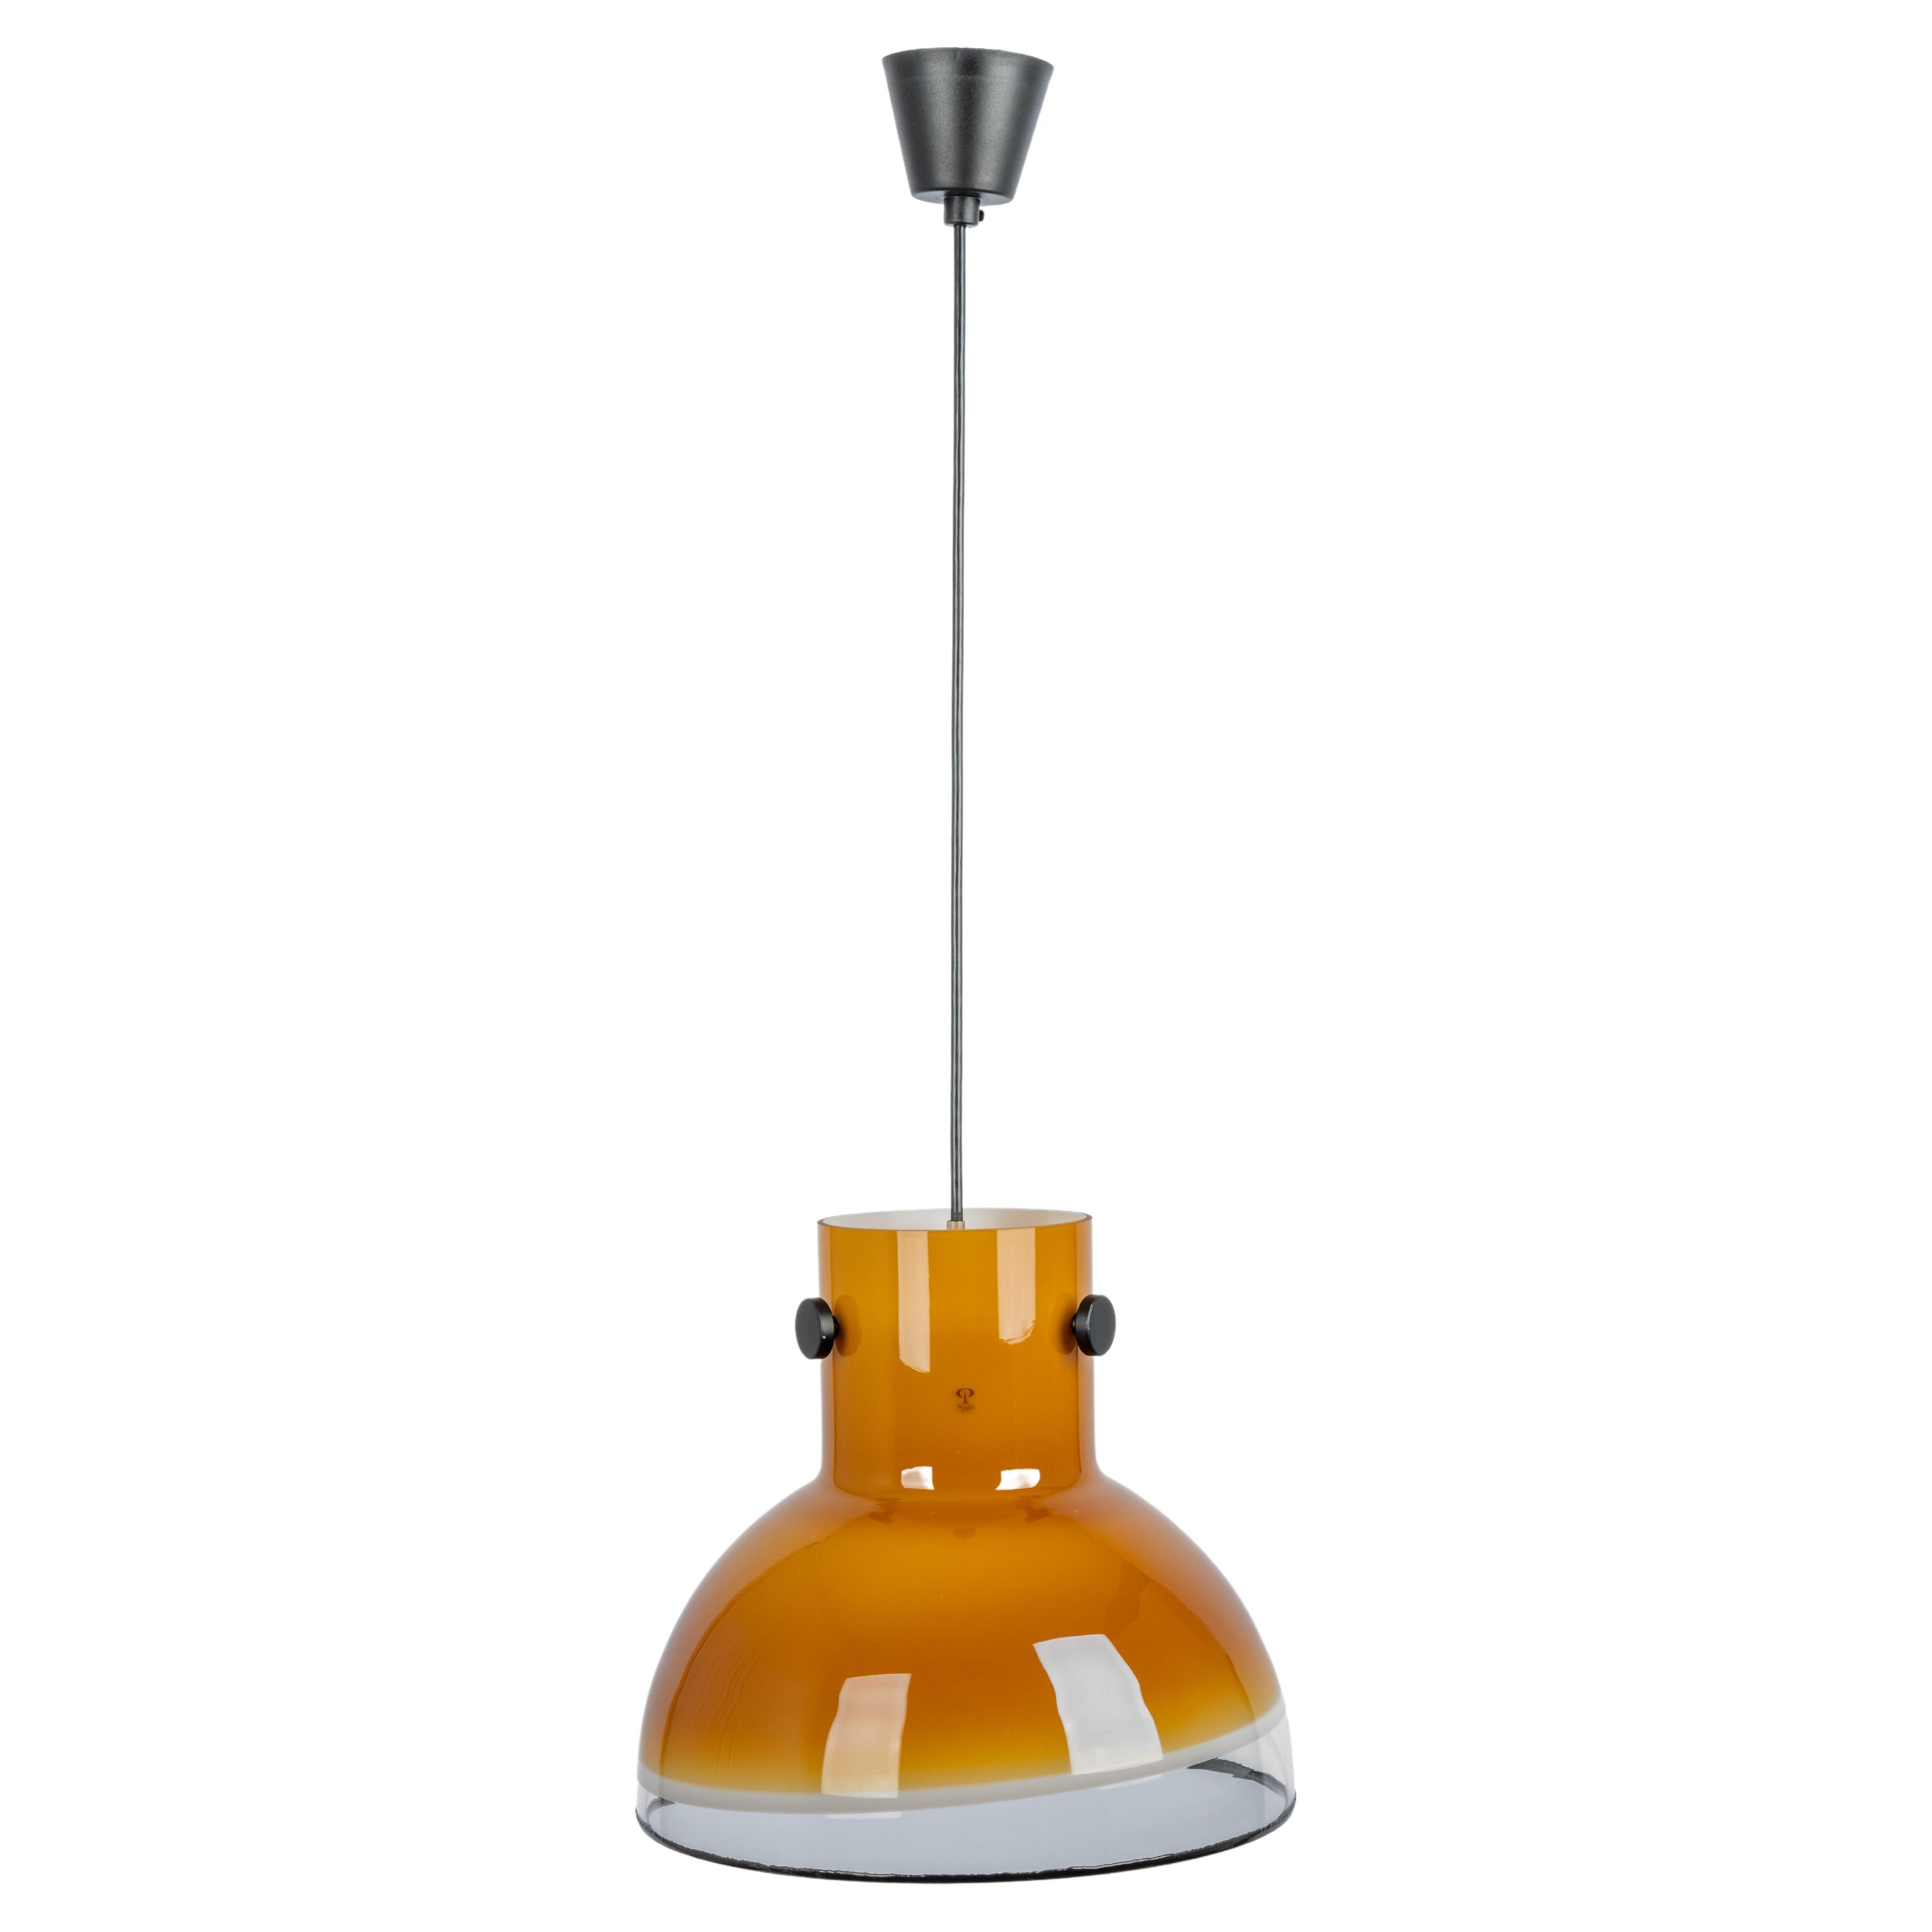 Light brown glass pendant light by Peill & Putzler, manufactured in Germany, circa the 1970s.
Wonderful light effect.
High quality and in very good condition. Cleaned, well-wired, and ready to use. 
The fixture requires 1 x E27 Standard bulbs